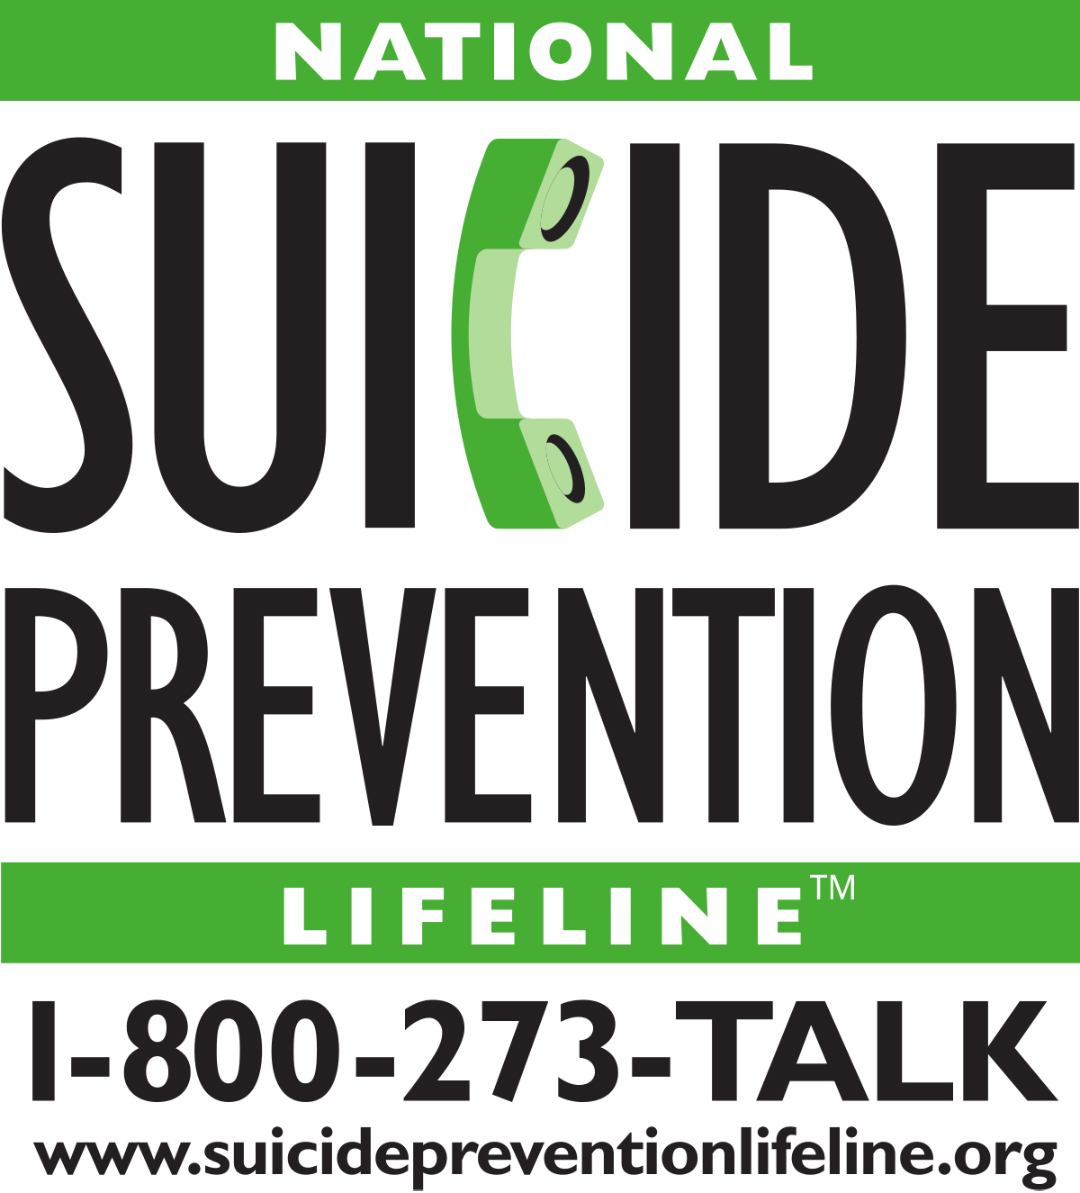 The National Suicide Prevention Lifeline